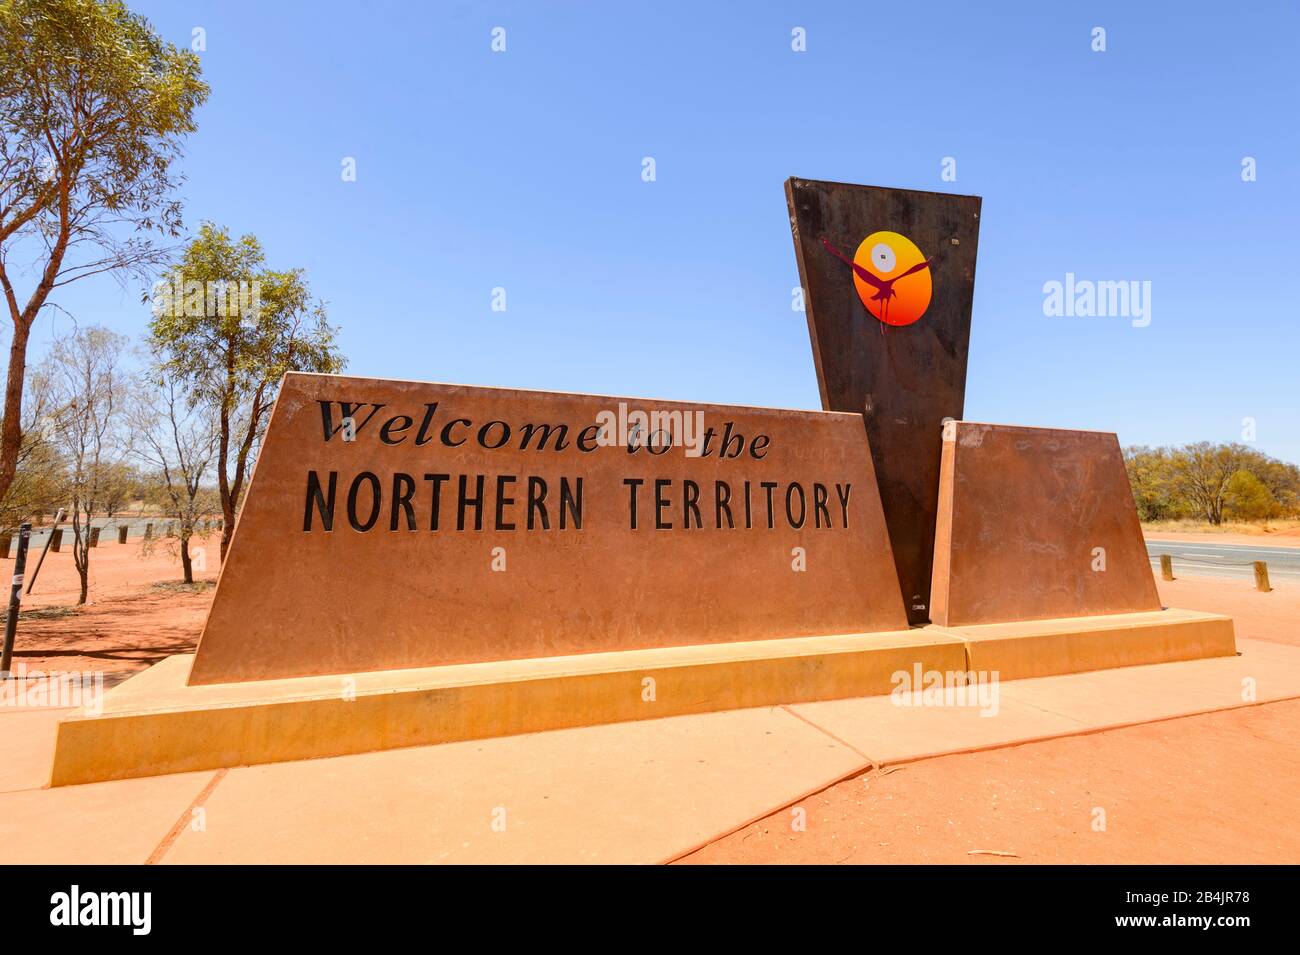 Welcome to the Northern Territory sign, NT, Australia Stock Photo